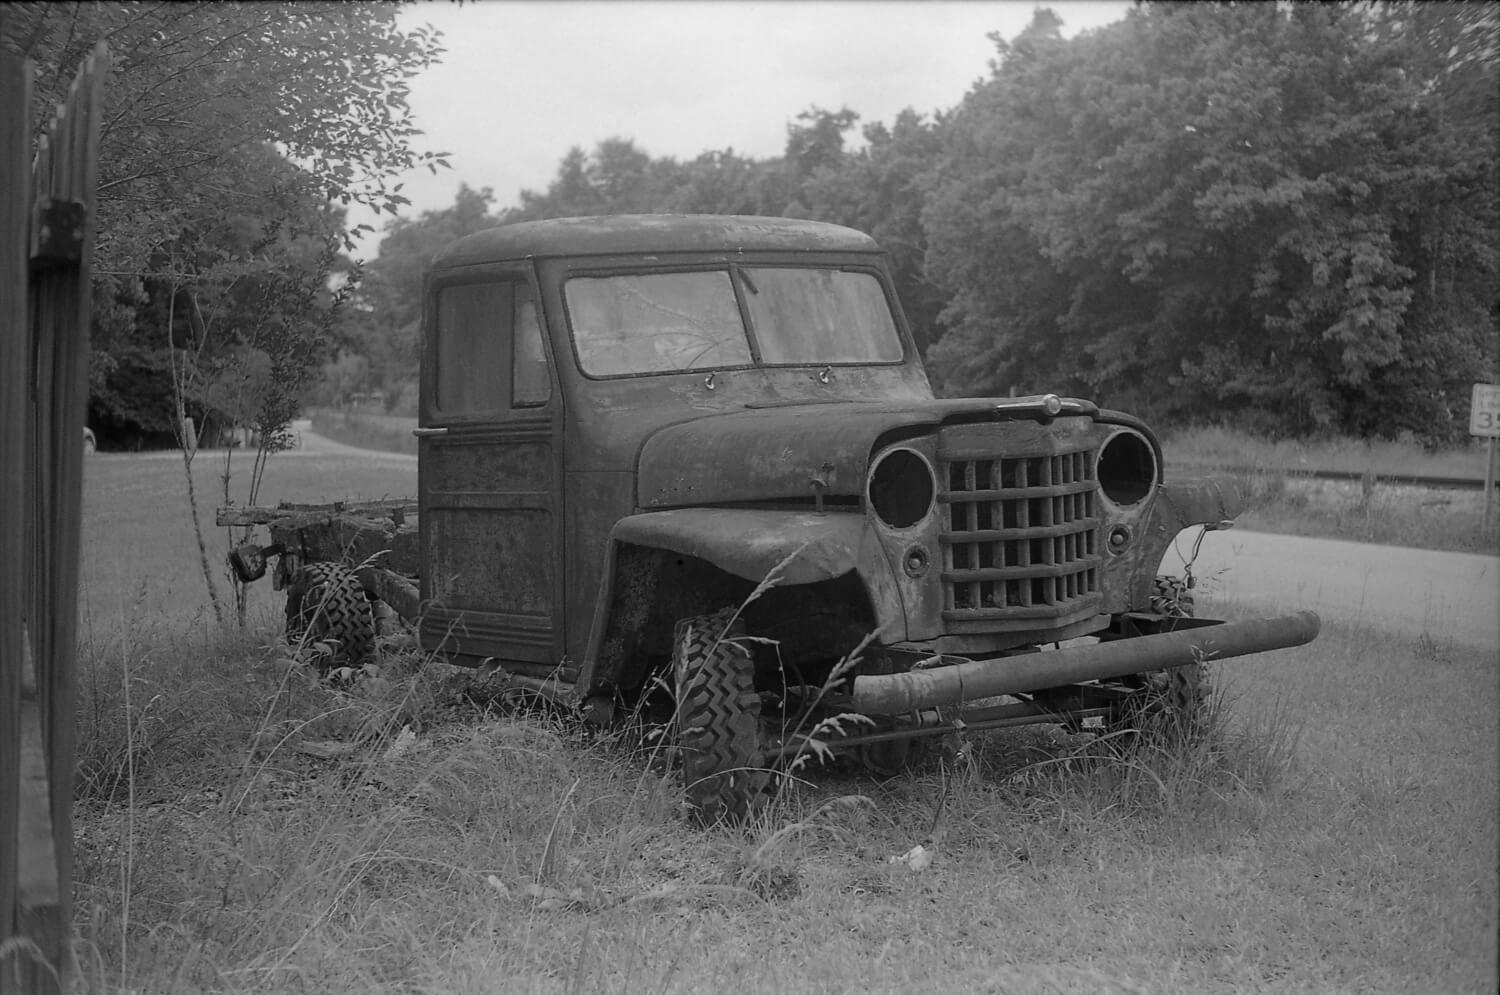 A tired old Jeep pickup.  Ilford FP4+ film.  No filters used.  I didn't own the Doomo meter at this point, so I guessed at the exposure.  I think it wsa 1/125 and f4.